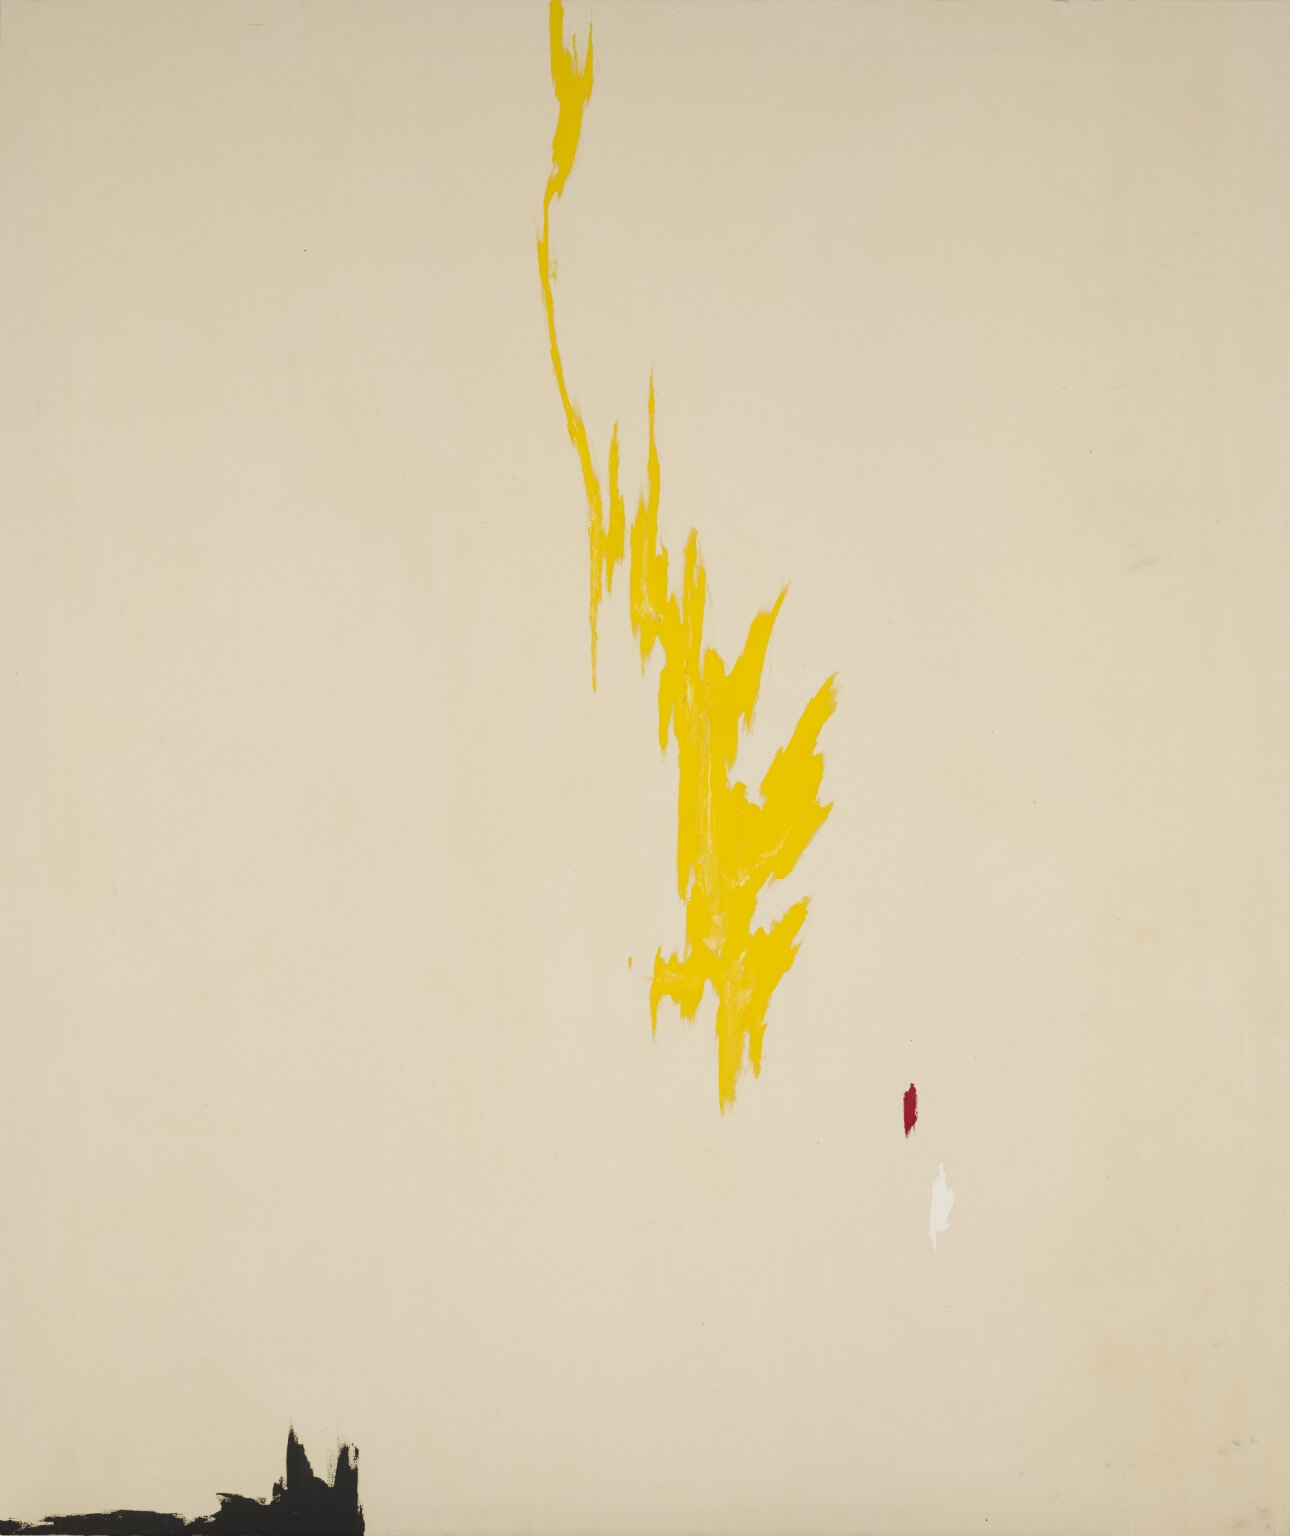 Bare canvas with abstract yellow shape moving upward in the center and a small black form at the bottom